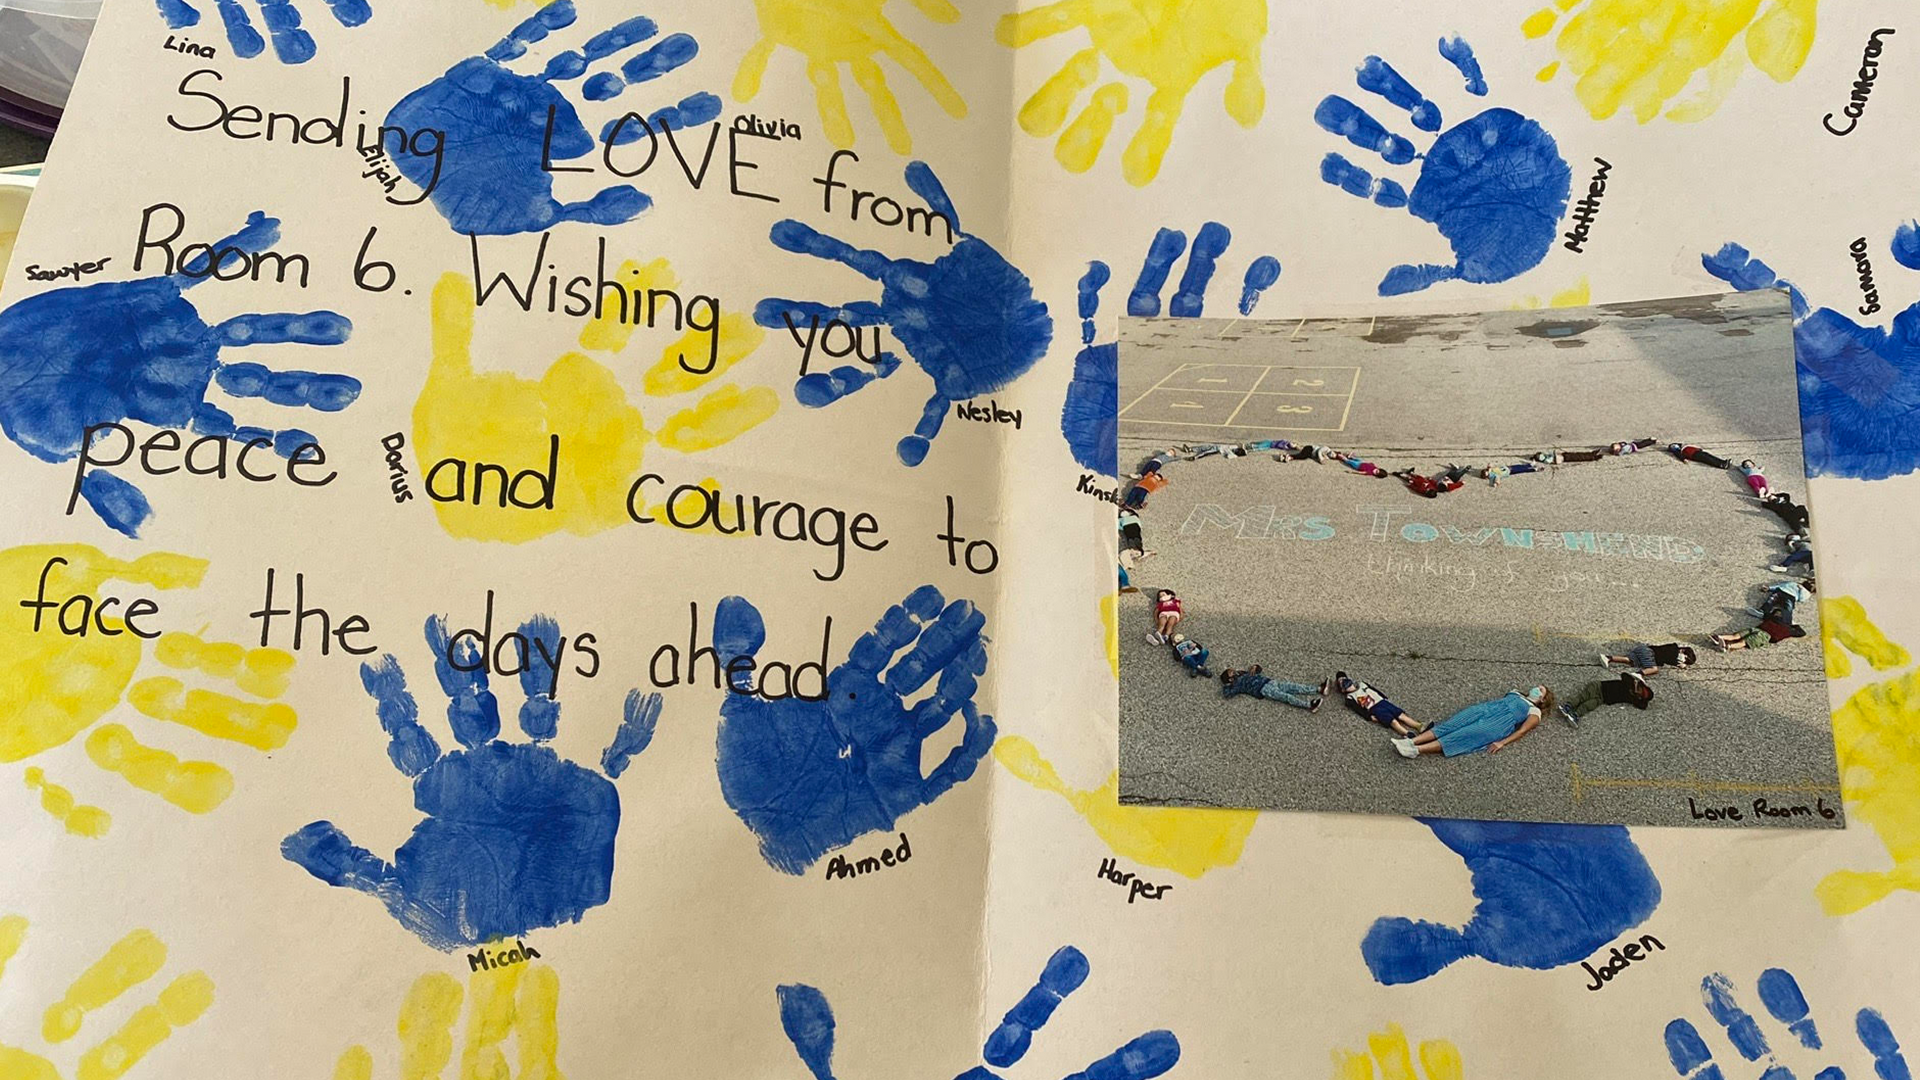 A card shows an image of students laying on tarmac in the shape of a heart along with the message "Sending Love from Room 6. Wishing you peace and courage to face the days ahead."